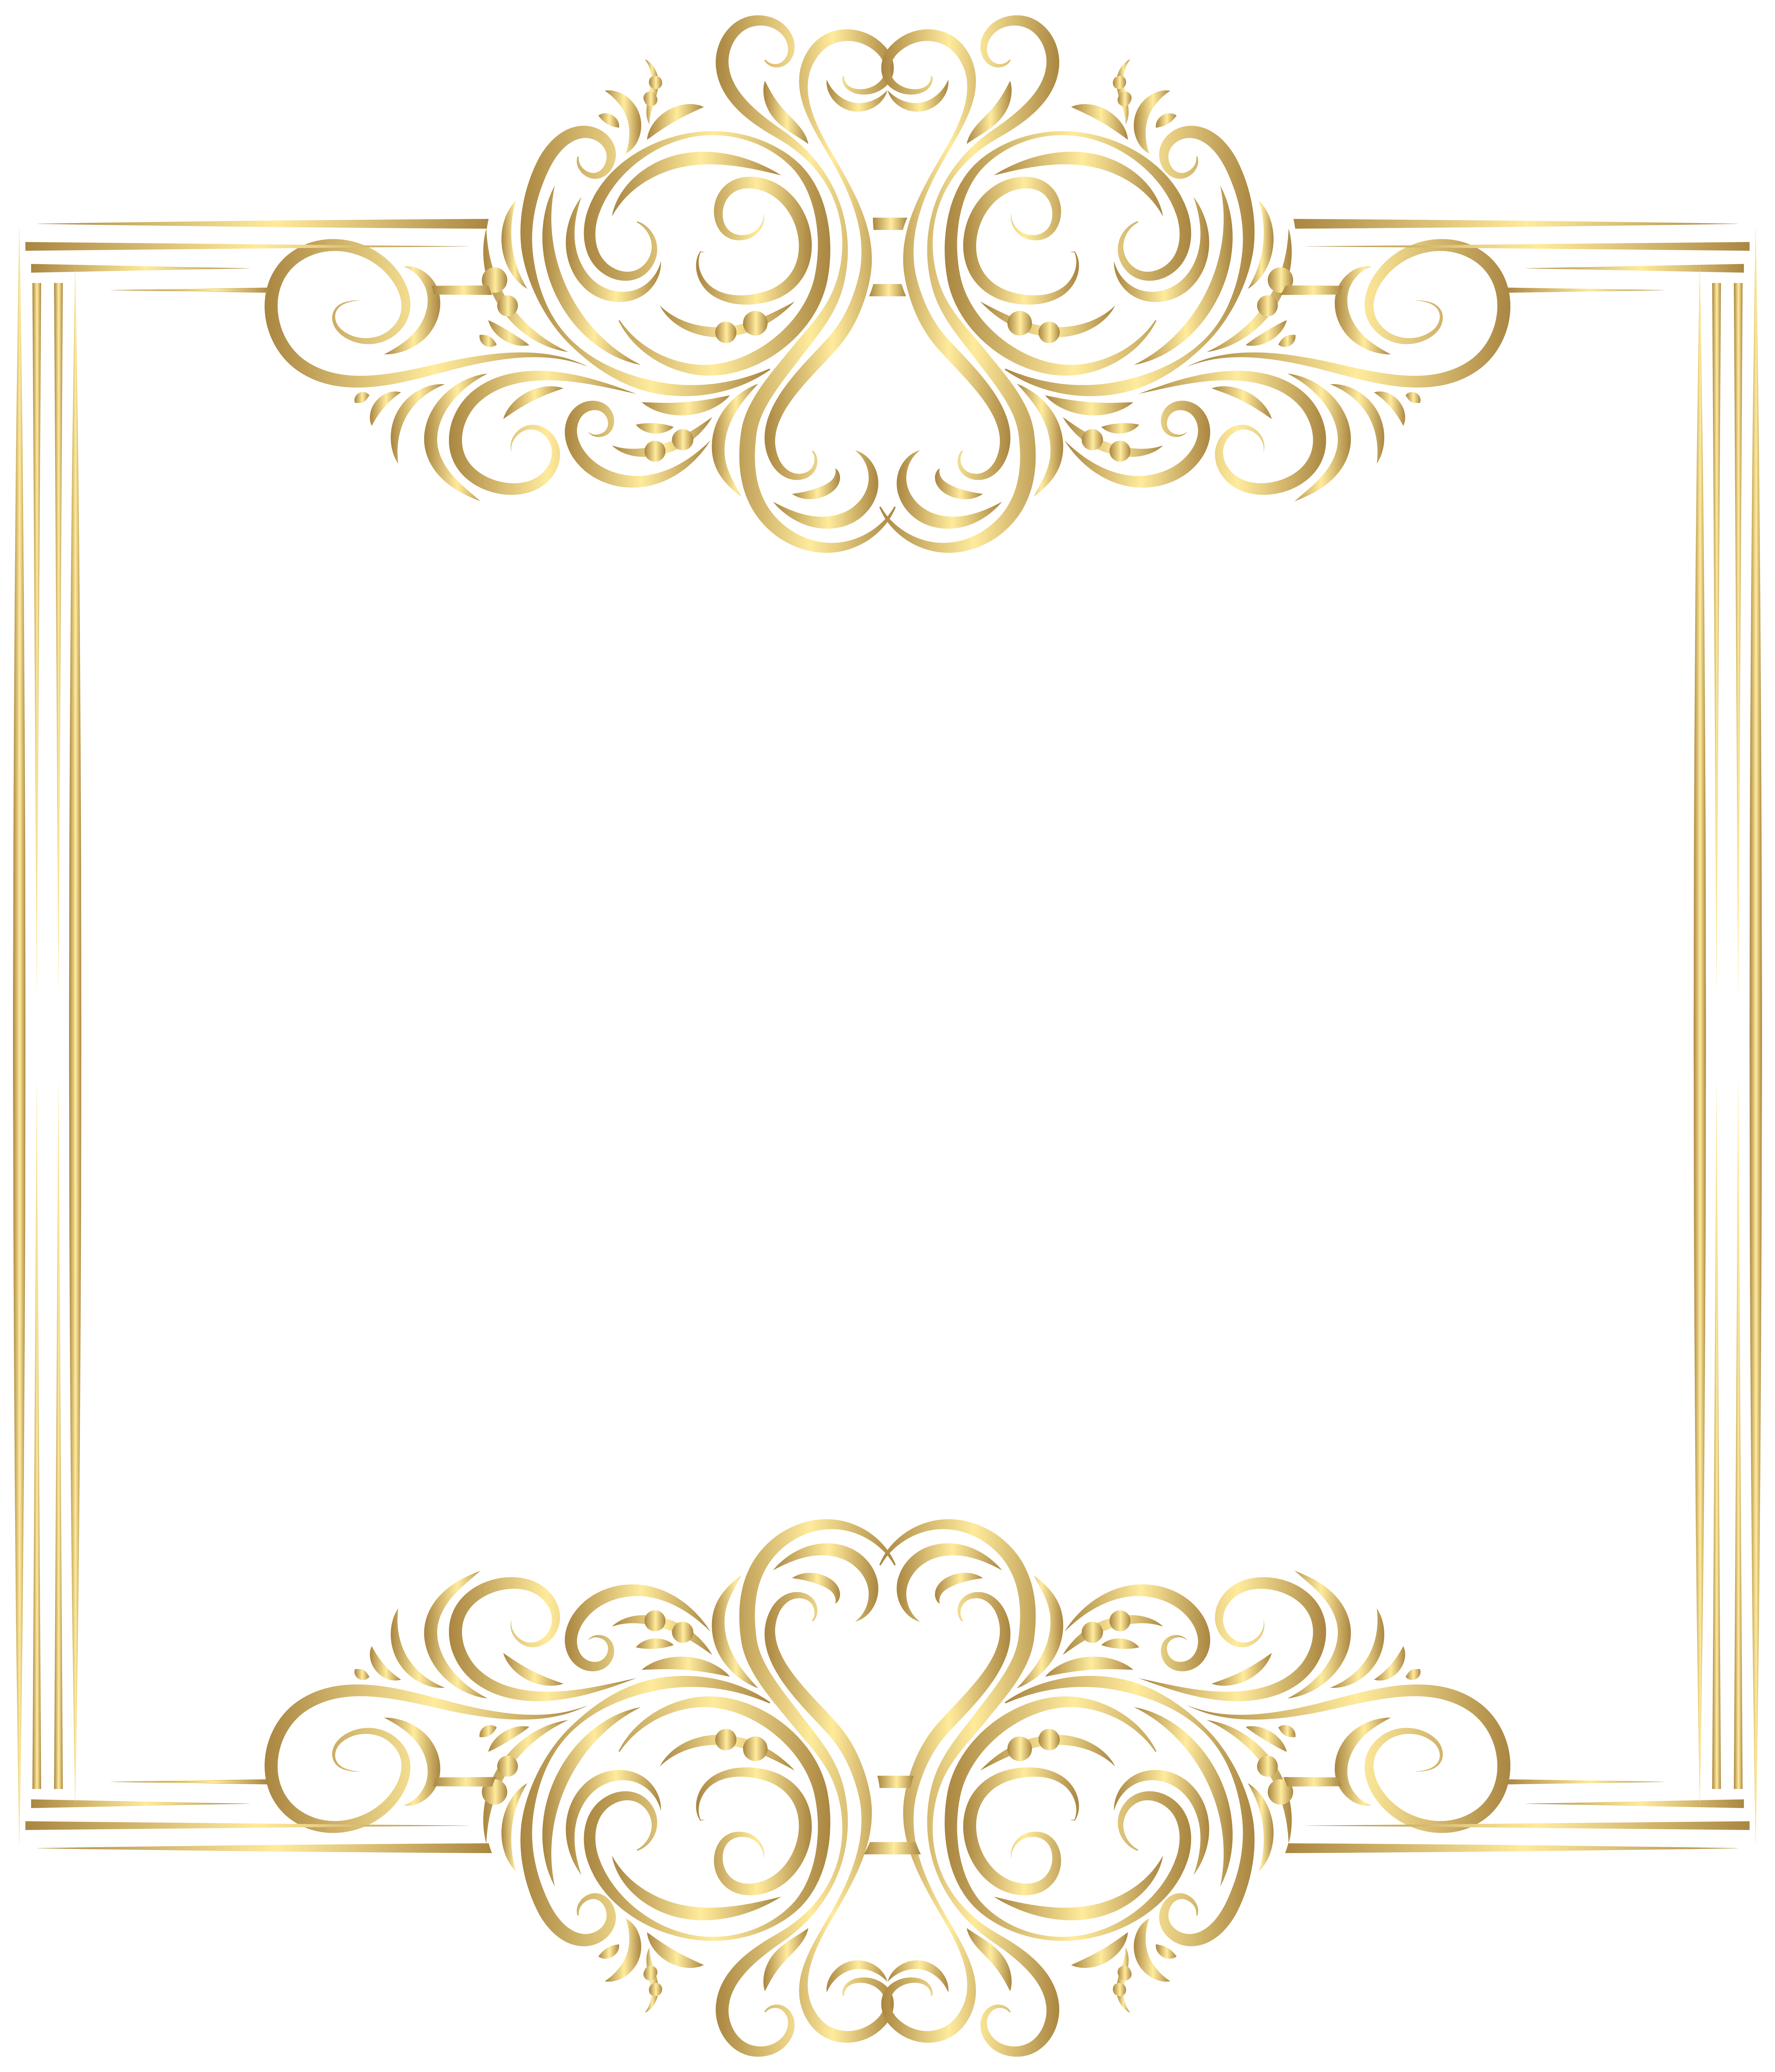 Download Frame Border Gold PNG Image High Quality Clipart